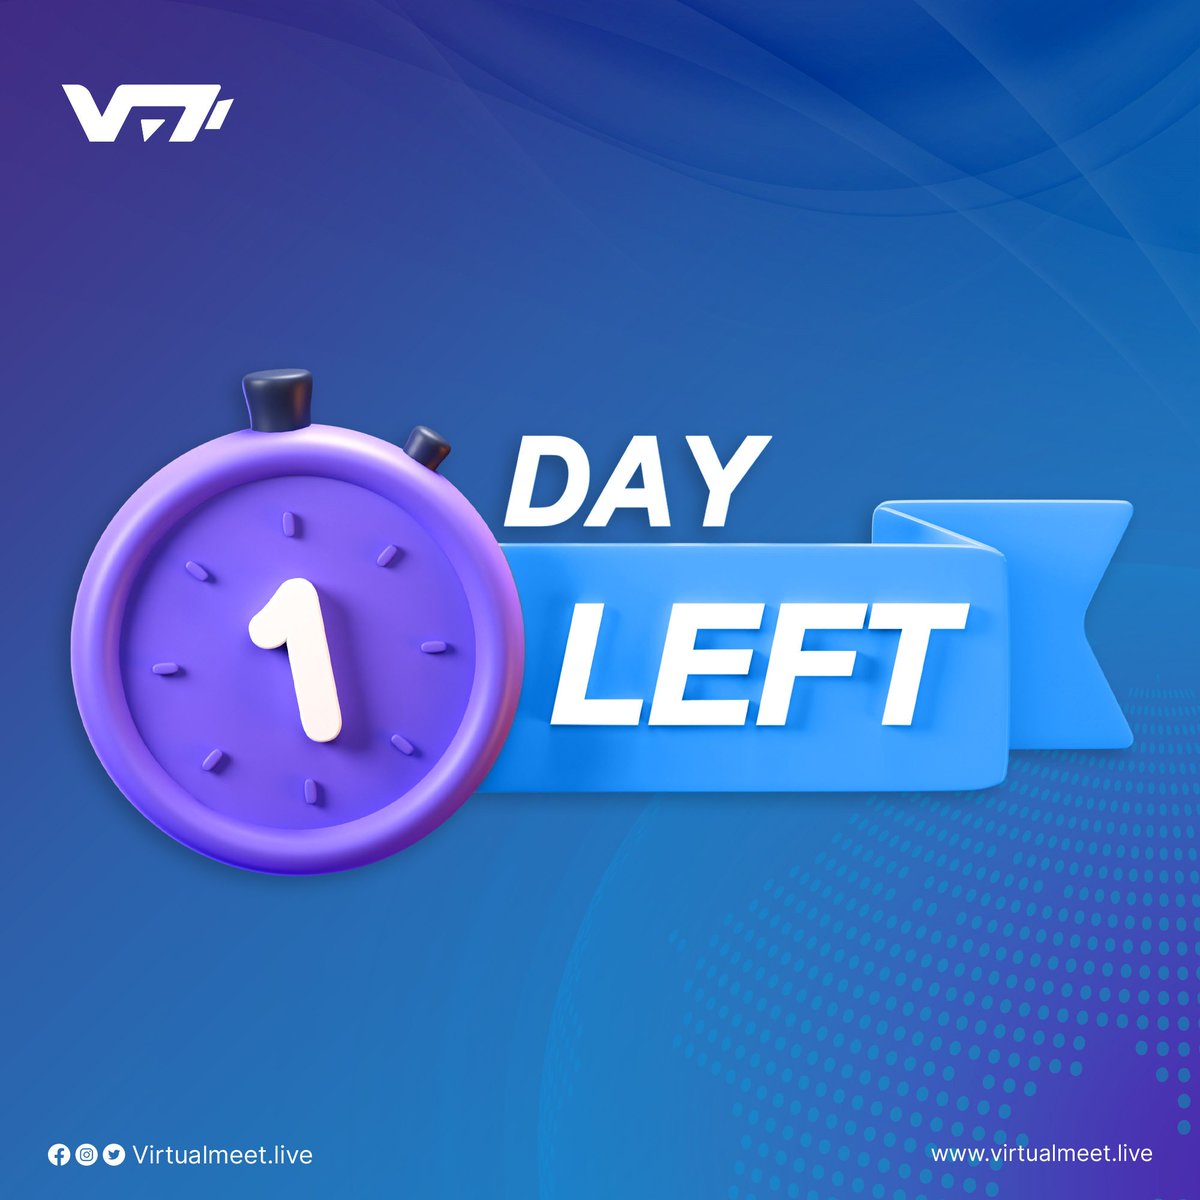 The final countdown is here! Just 1 day left until April 15th, the day we've all been waiting for in the world of crypto. Get ready to witness history in the making!

#1dayleft #InnovationFactory #BFIC #BULLRUN #BFICToTheMoon #SomethingBigisComing #ChangeisComing #BullRun